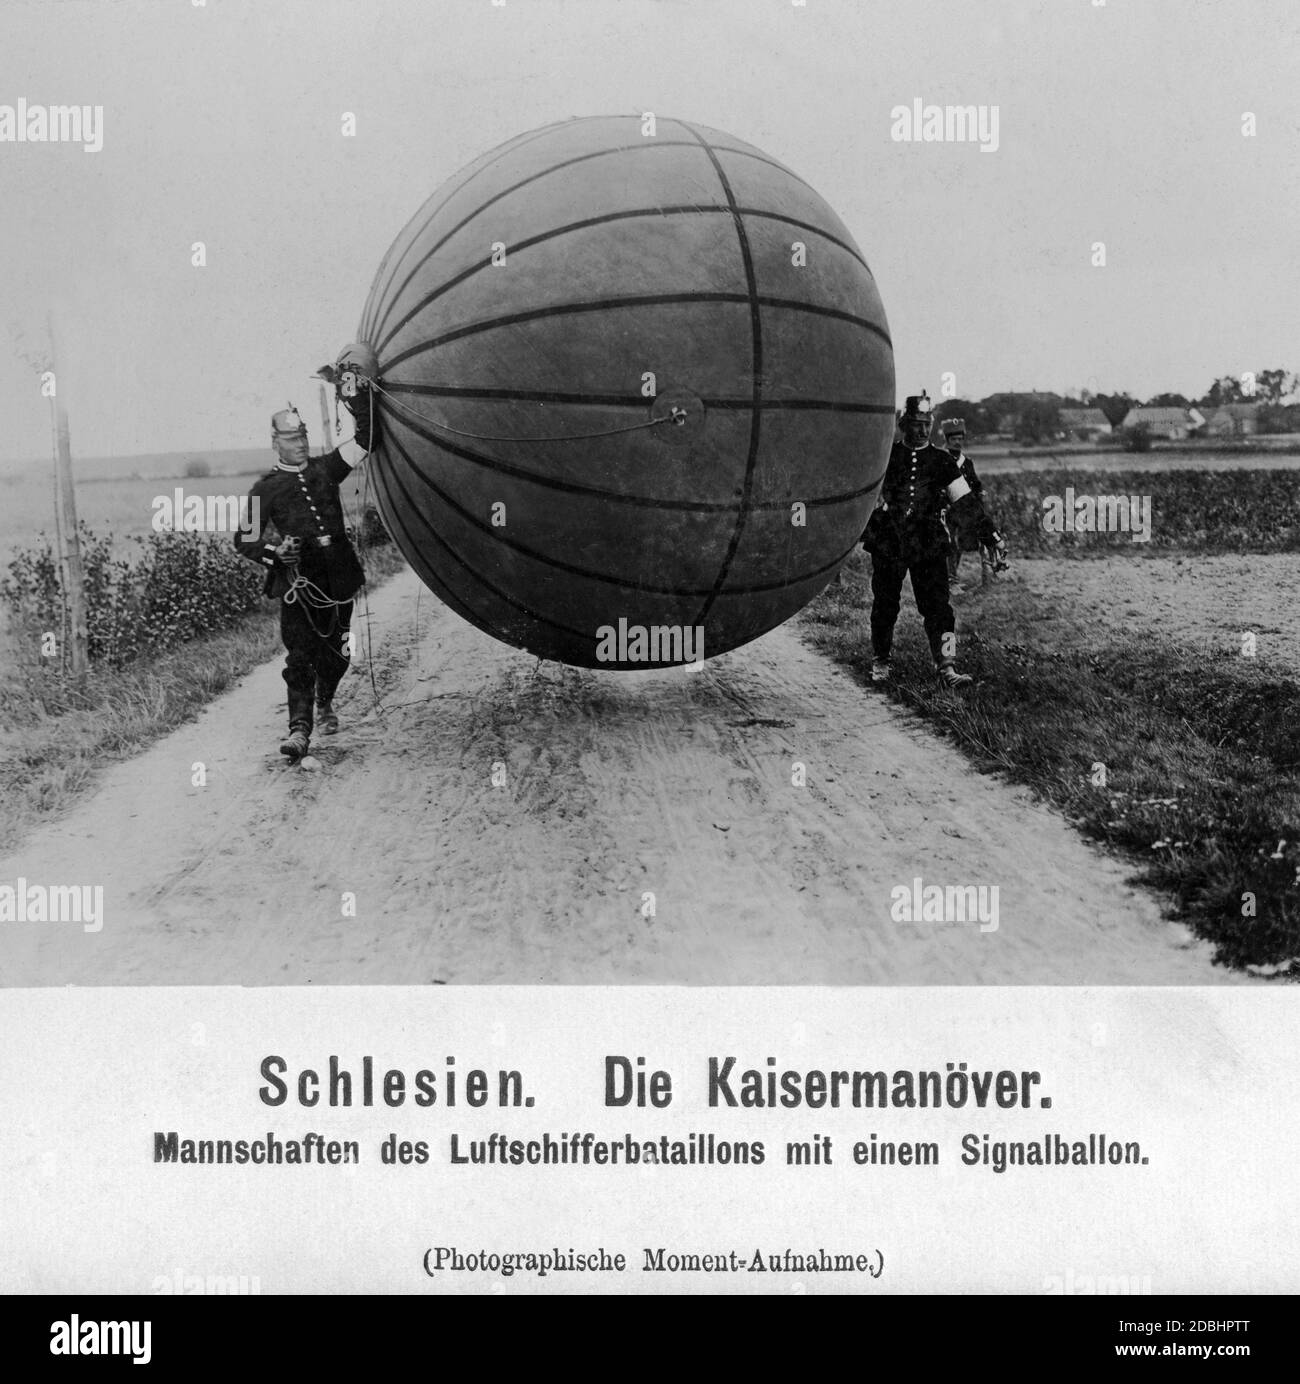 Teams of the Luftschifferbataillon (airship battalion) with a signal balloon during the imperial manoeuvre in Silesia. Stock Photo